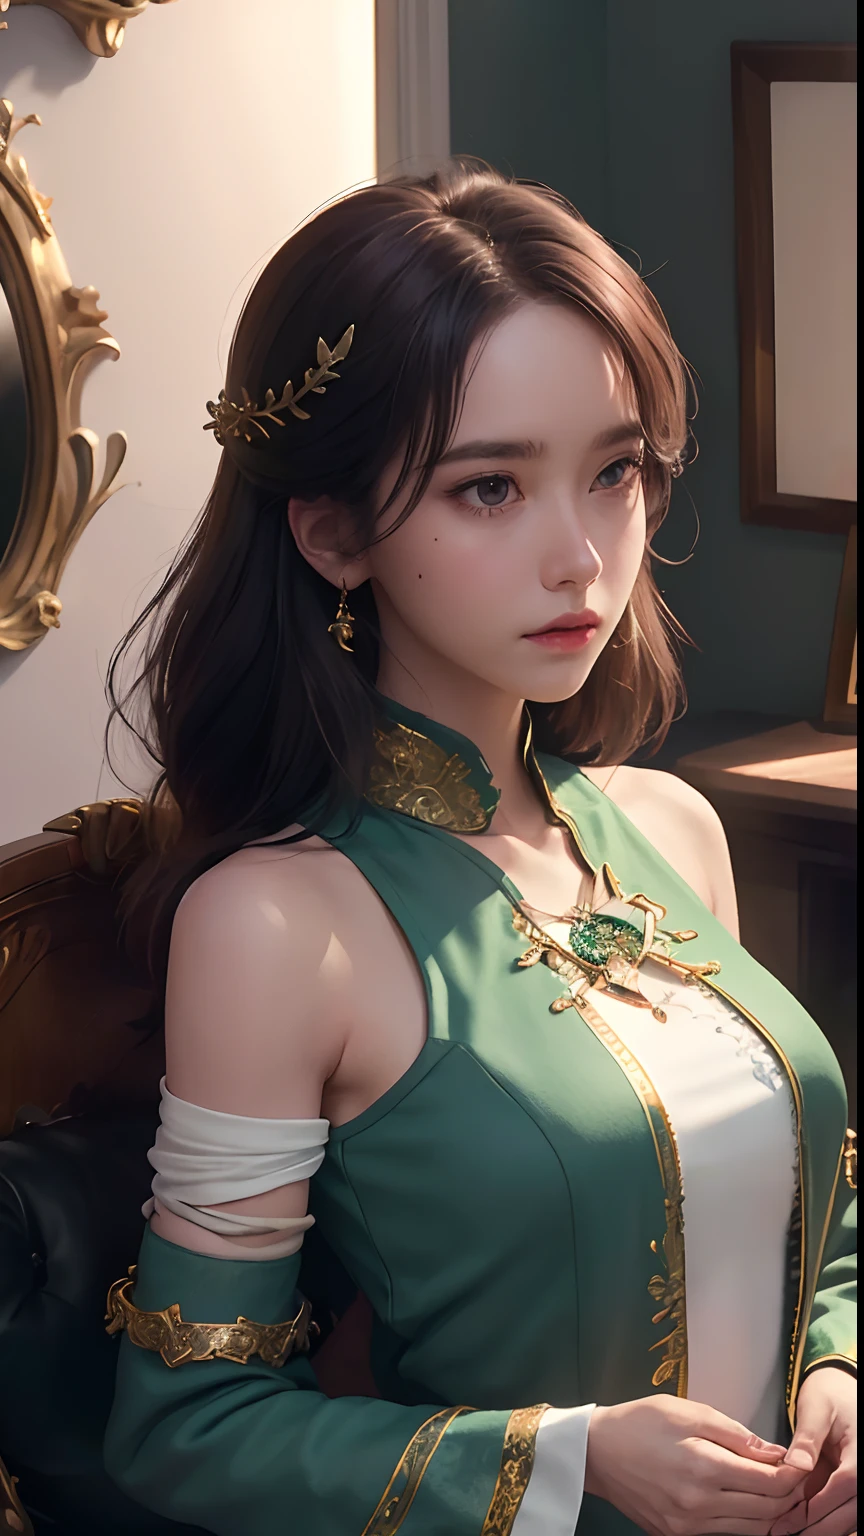 (1girl:1.3),solo,__body-parts__,
official art, unity 8k wallpaper, ultra detailed, beautiful and aesthetic, beautiful, masterpiece, best quality,Fantastical Atmosphere, Calming Palette, Tranquil Mood, Soft Shading,
Miko priestess, charm spell, talisman familiar, shrine maiden duties,